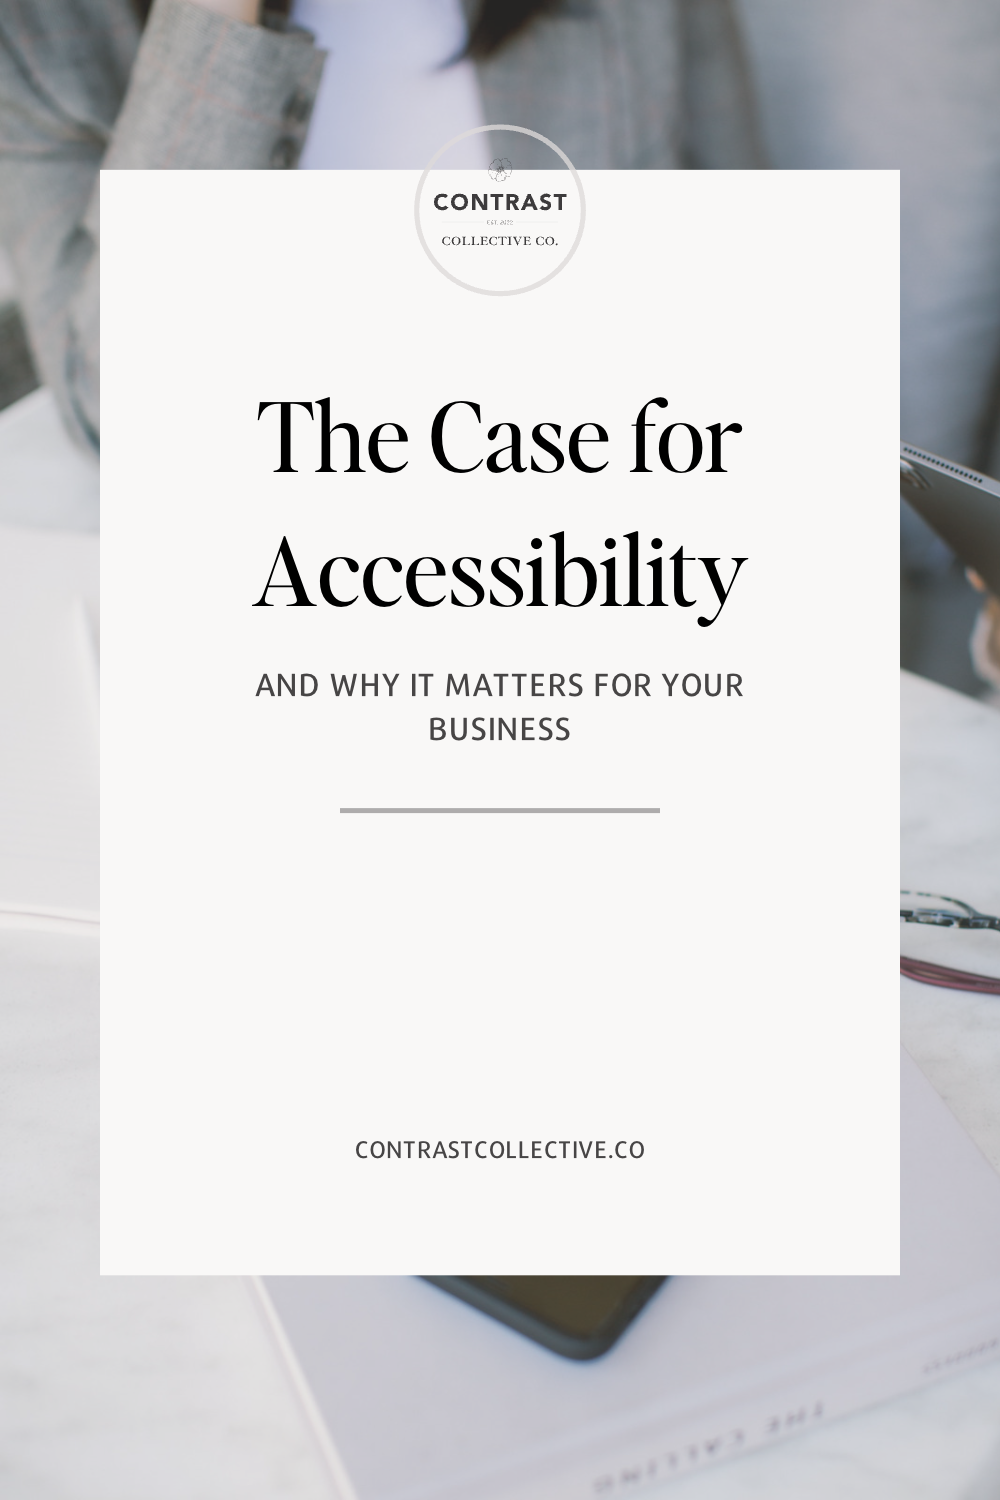 Cover page for the blog post titled "The Case for Web Accessibility".